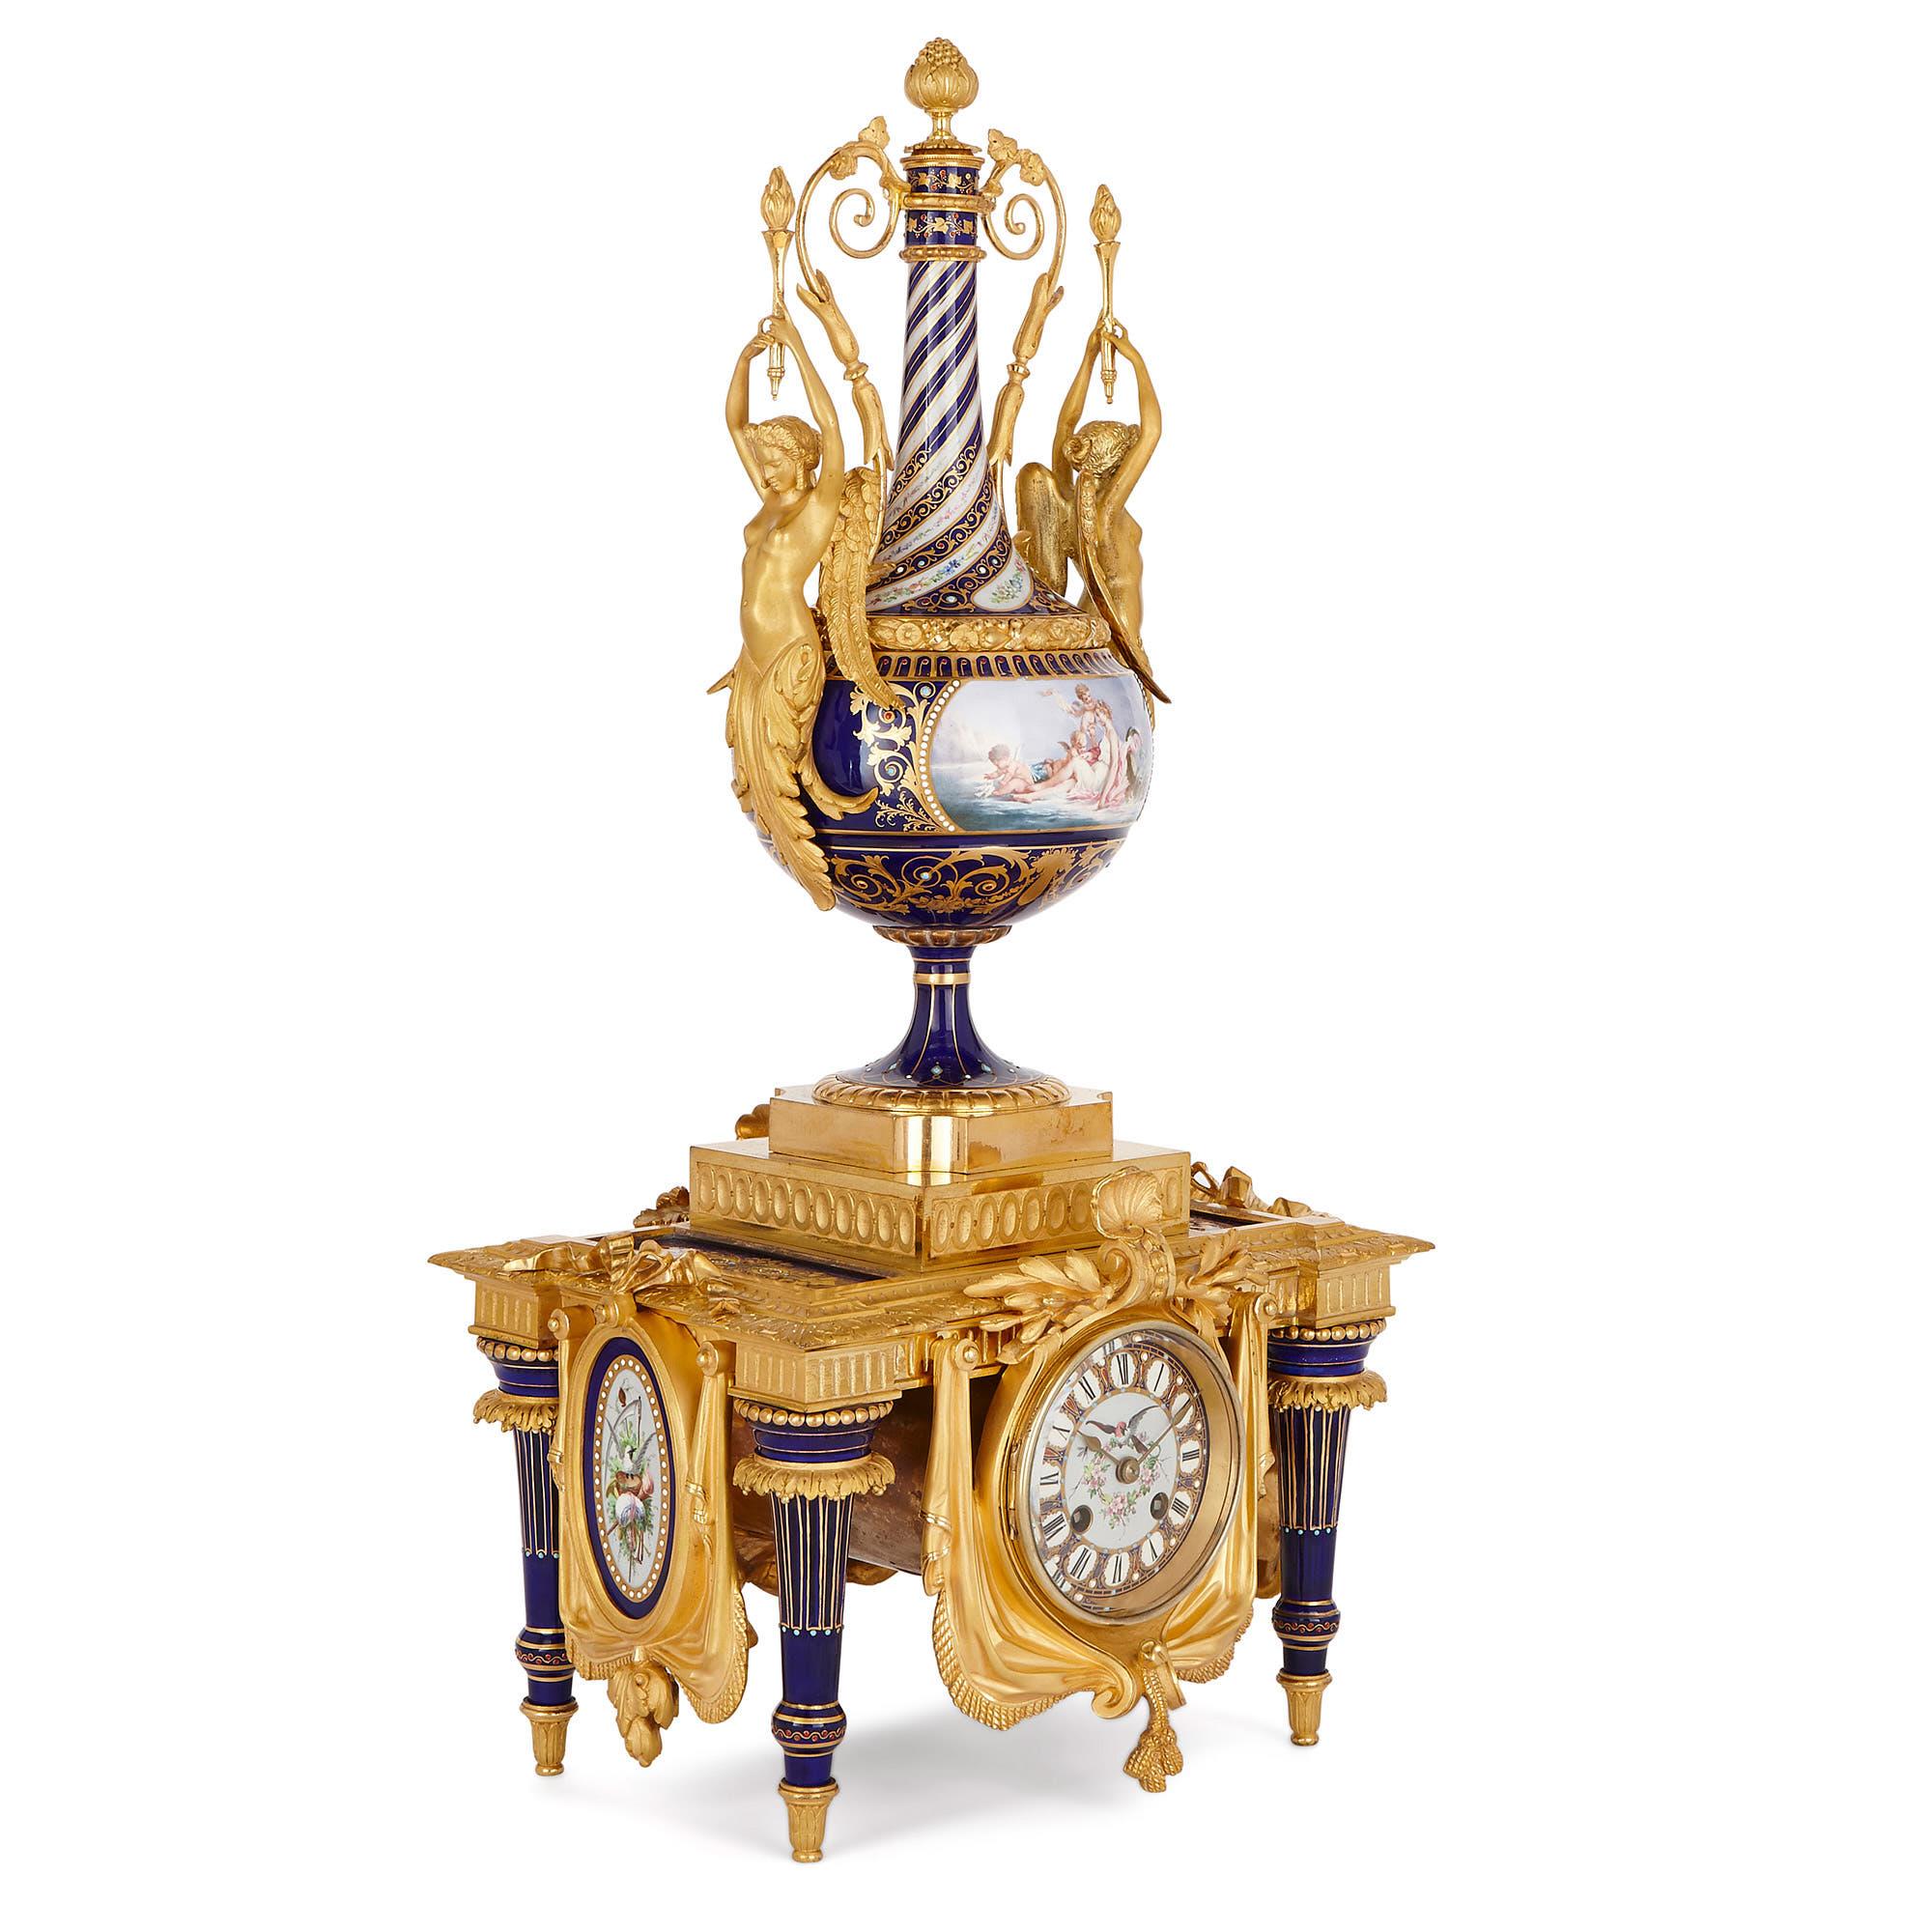 This beautiful Louis XVI style mantel clock was designed by Louis-Constant Sévin, who was the chief ornamentalist at the prestigious Barbedienne bronze foundry in Paris. The company was directed by Ferdinand Barbedienne, who was a famous French